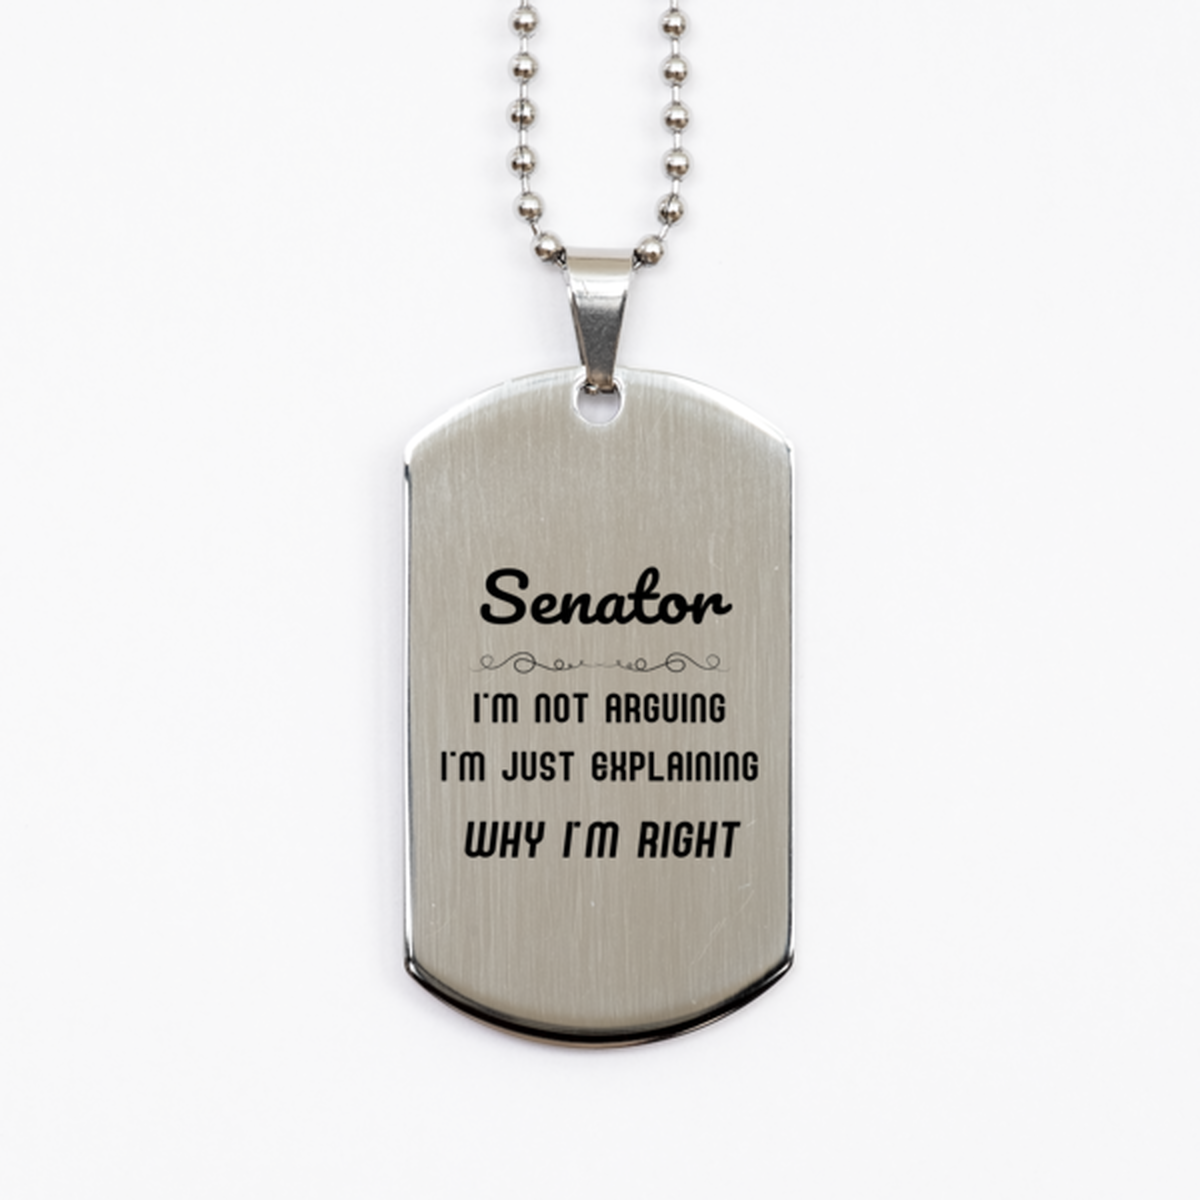 Senator I'm not Arguing. I'm Just Explaining Why I'm RIGHT Silver Dog Tag, Funny Saying Quote Senator Gifts For Senator Graduation Birthday Christmas Gifts for Men Women Coworker